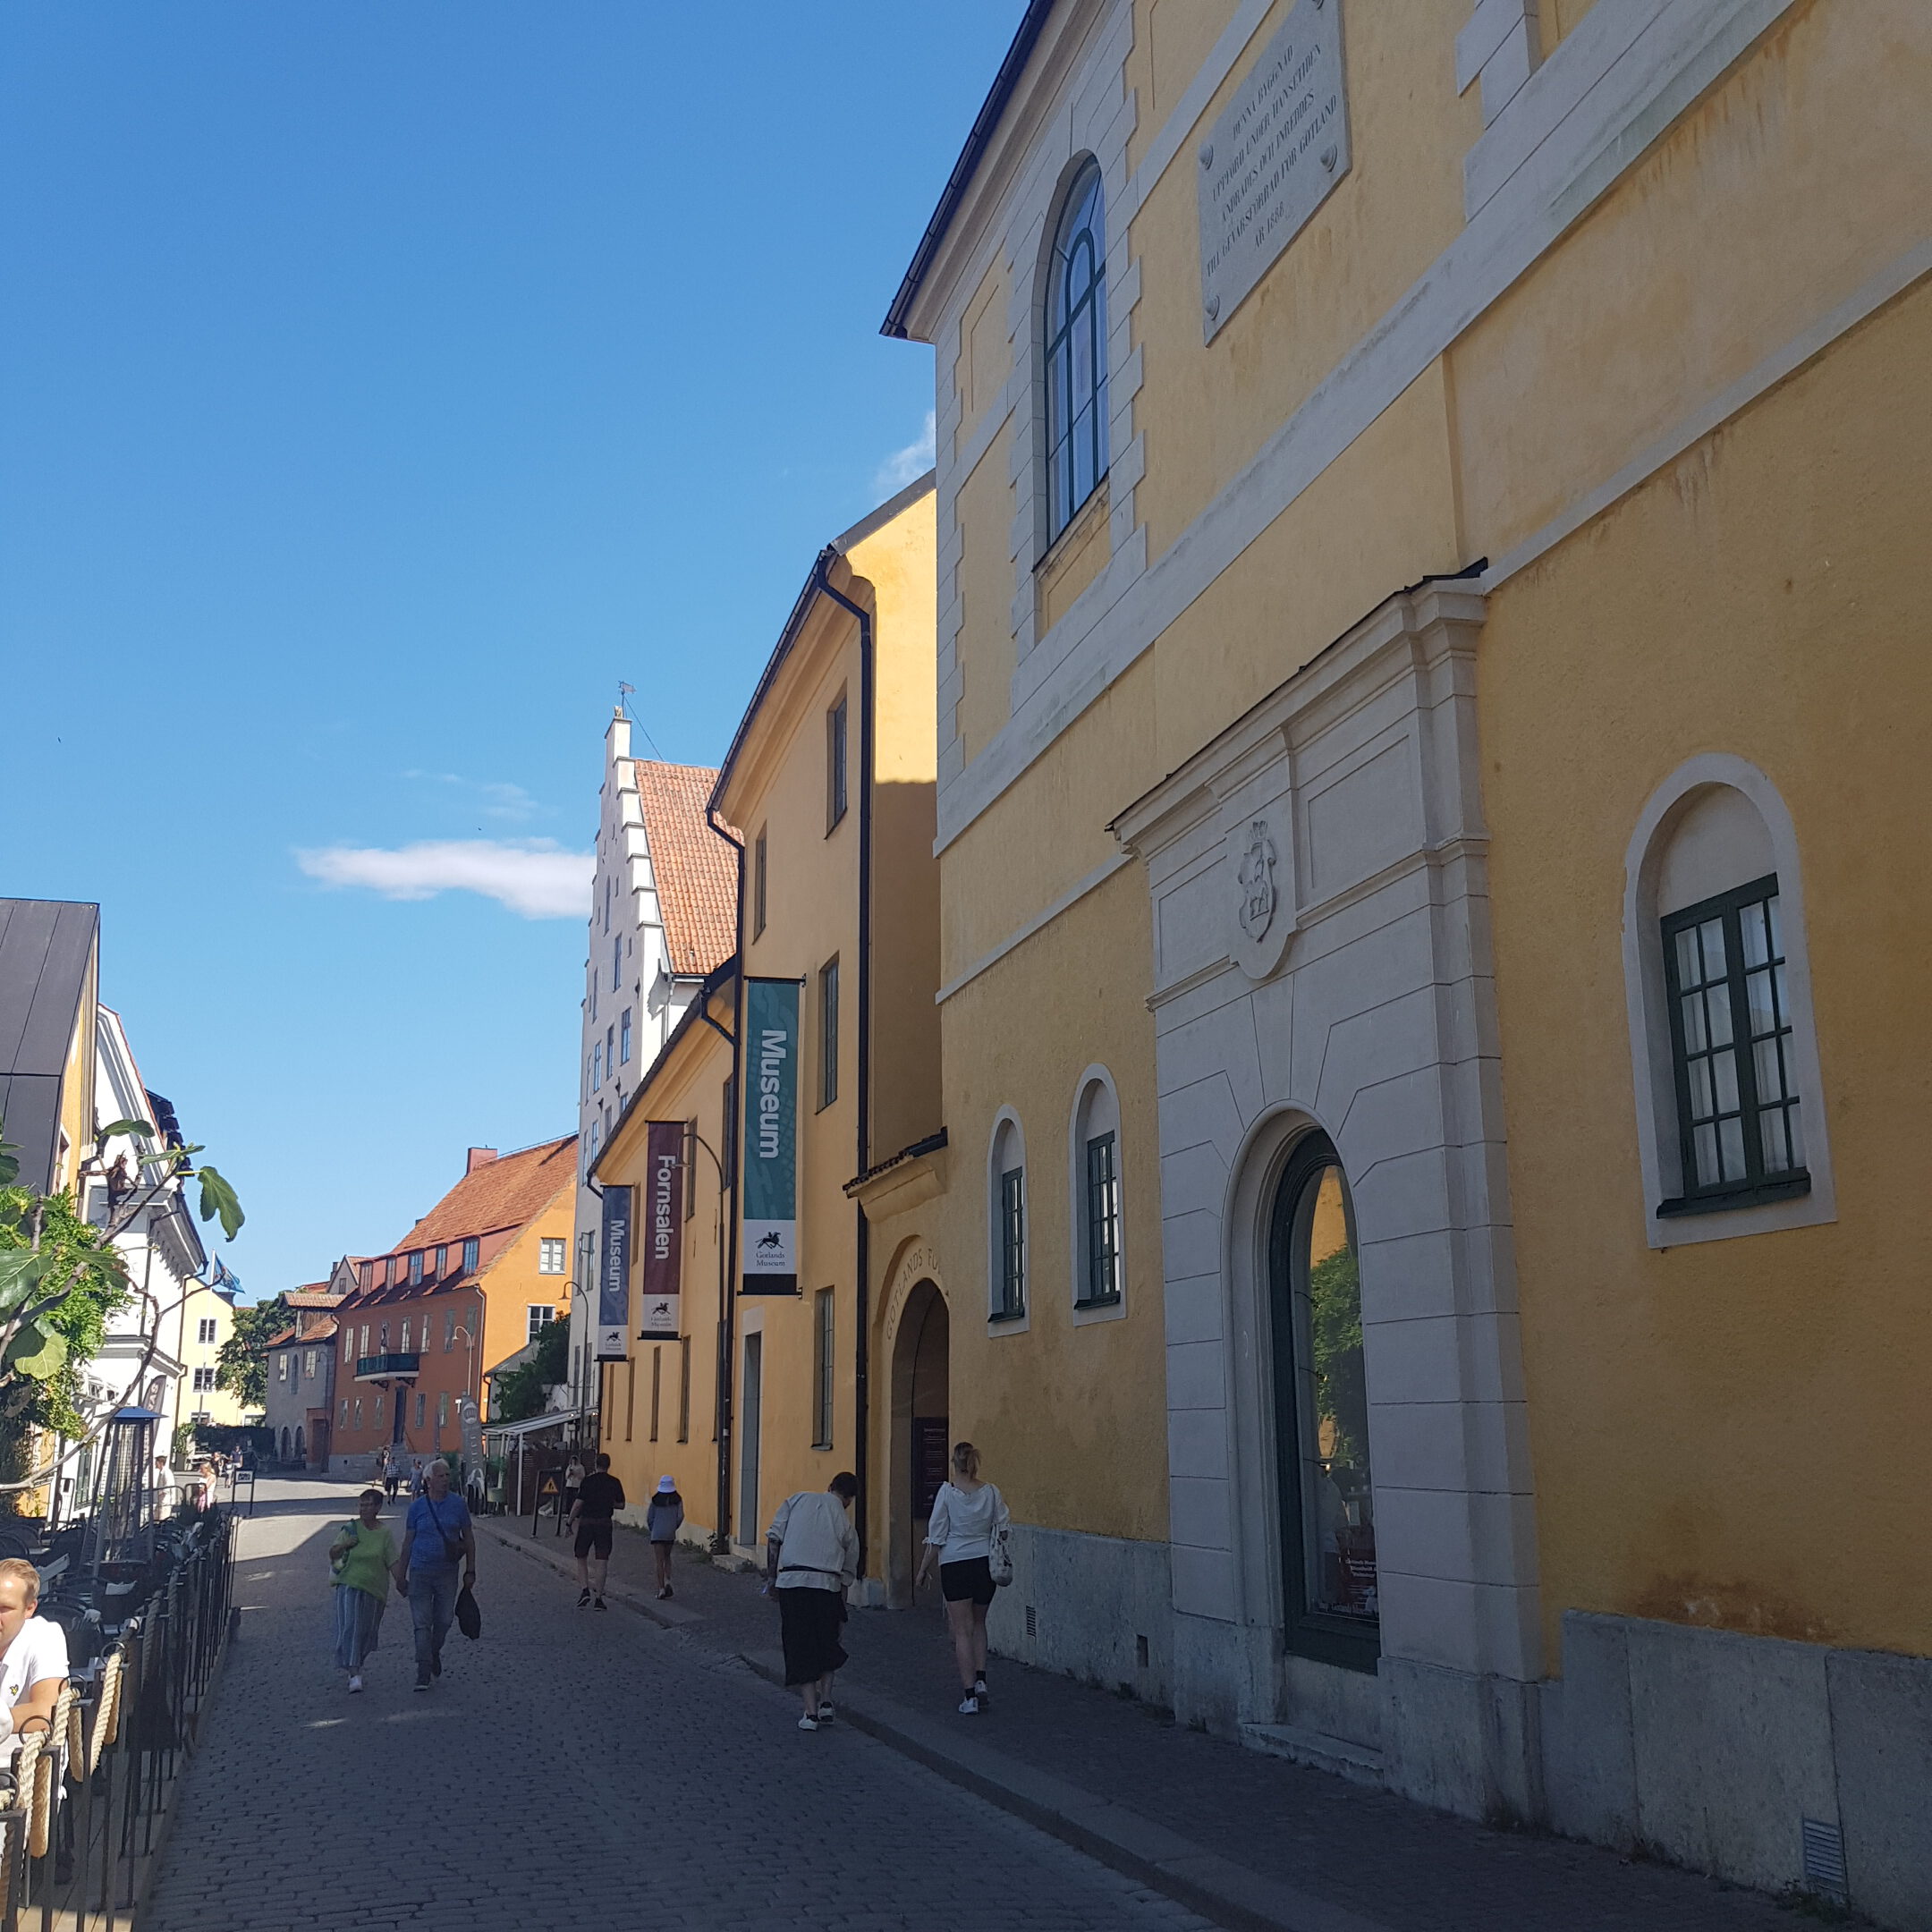 Hafentag in Visby